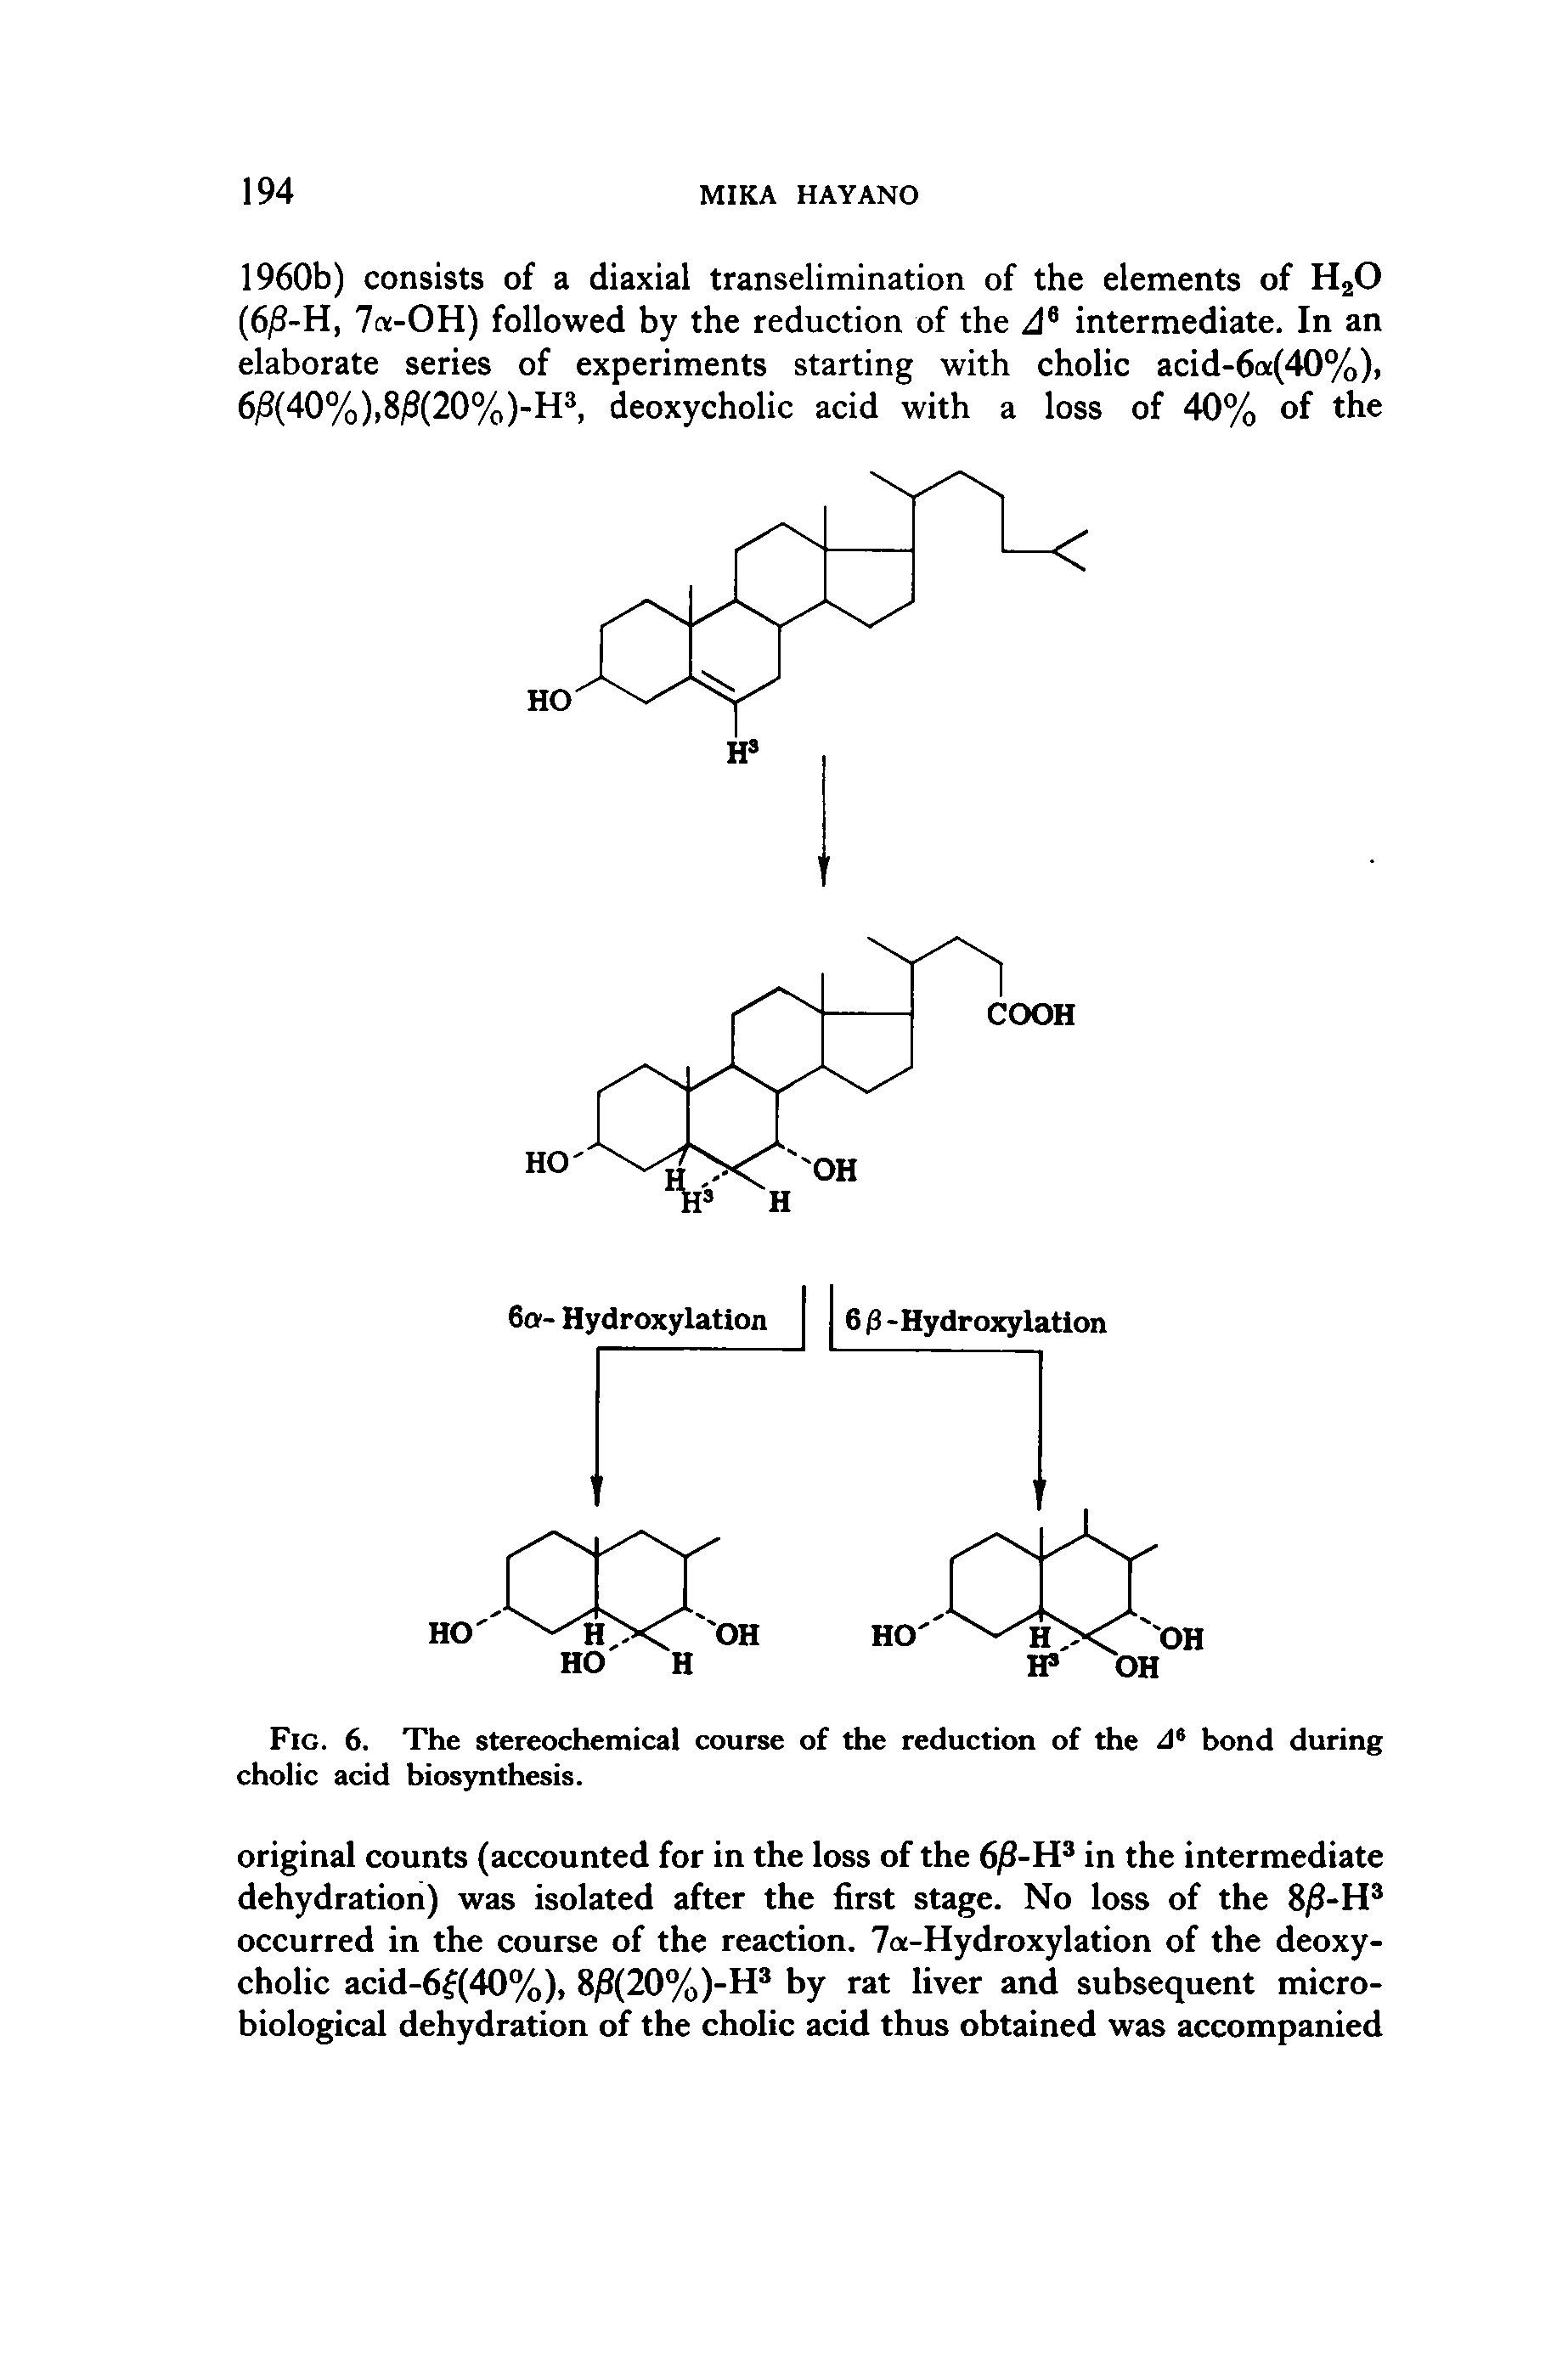 Fig. 6. The stereochemical course of the reduction of the d bond during cholic acid biosynthesis.